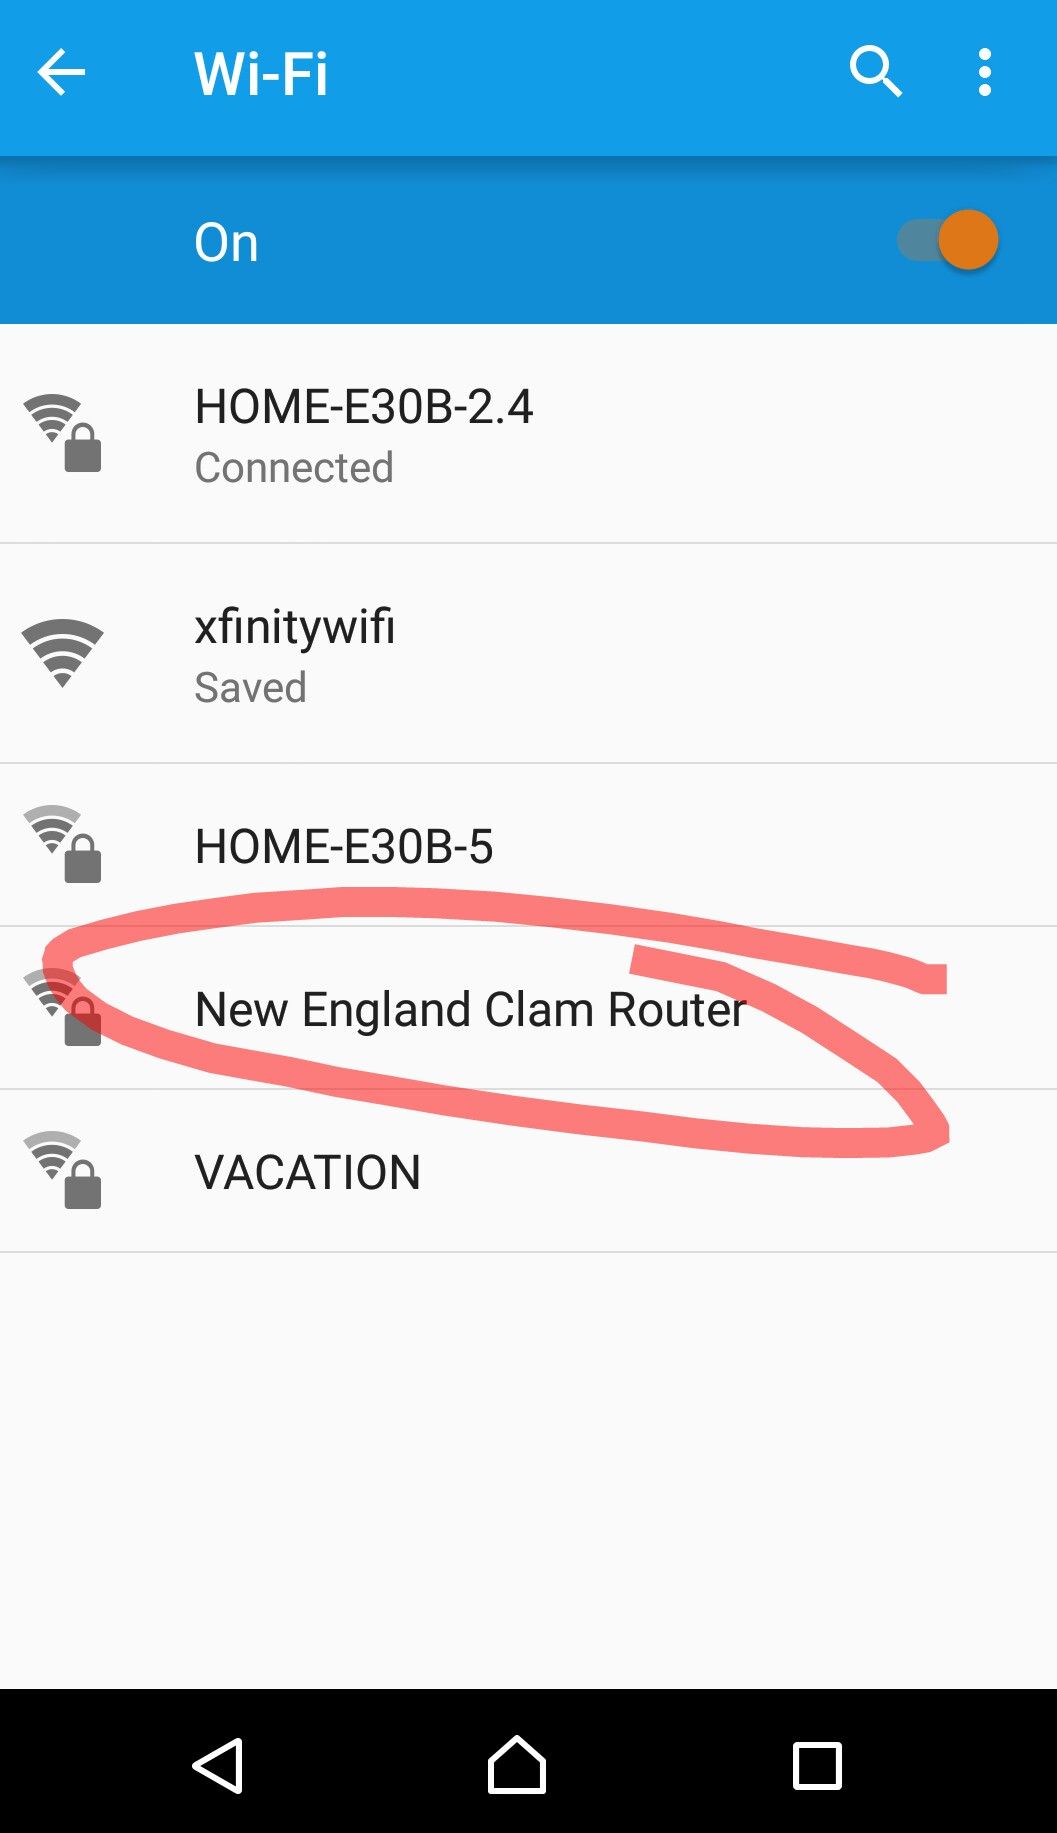 Vacationing on Cape Cod. Impressed with the neighbor's network name.